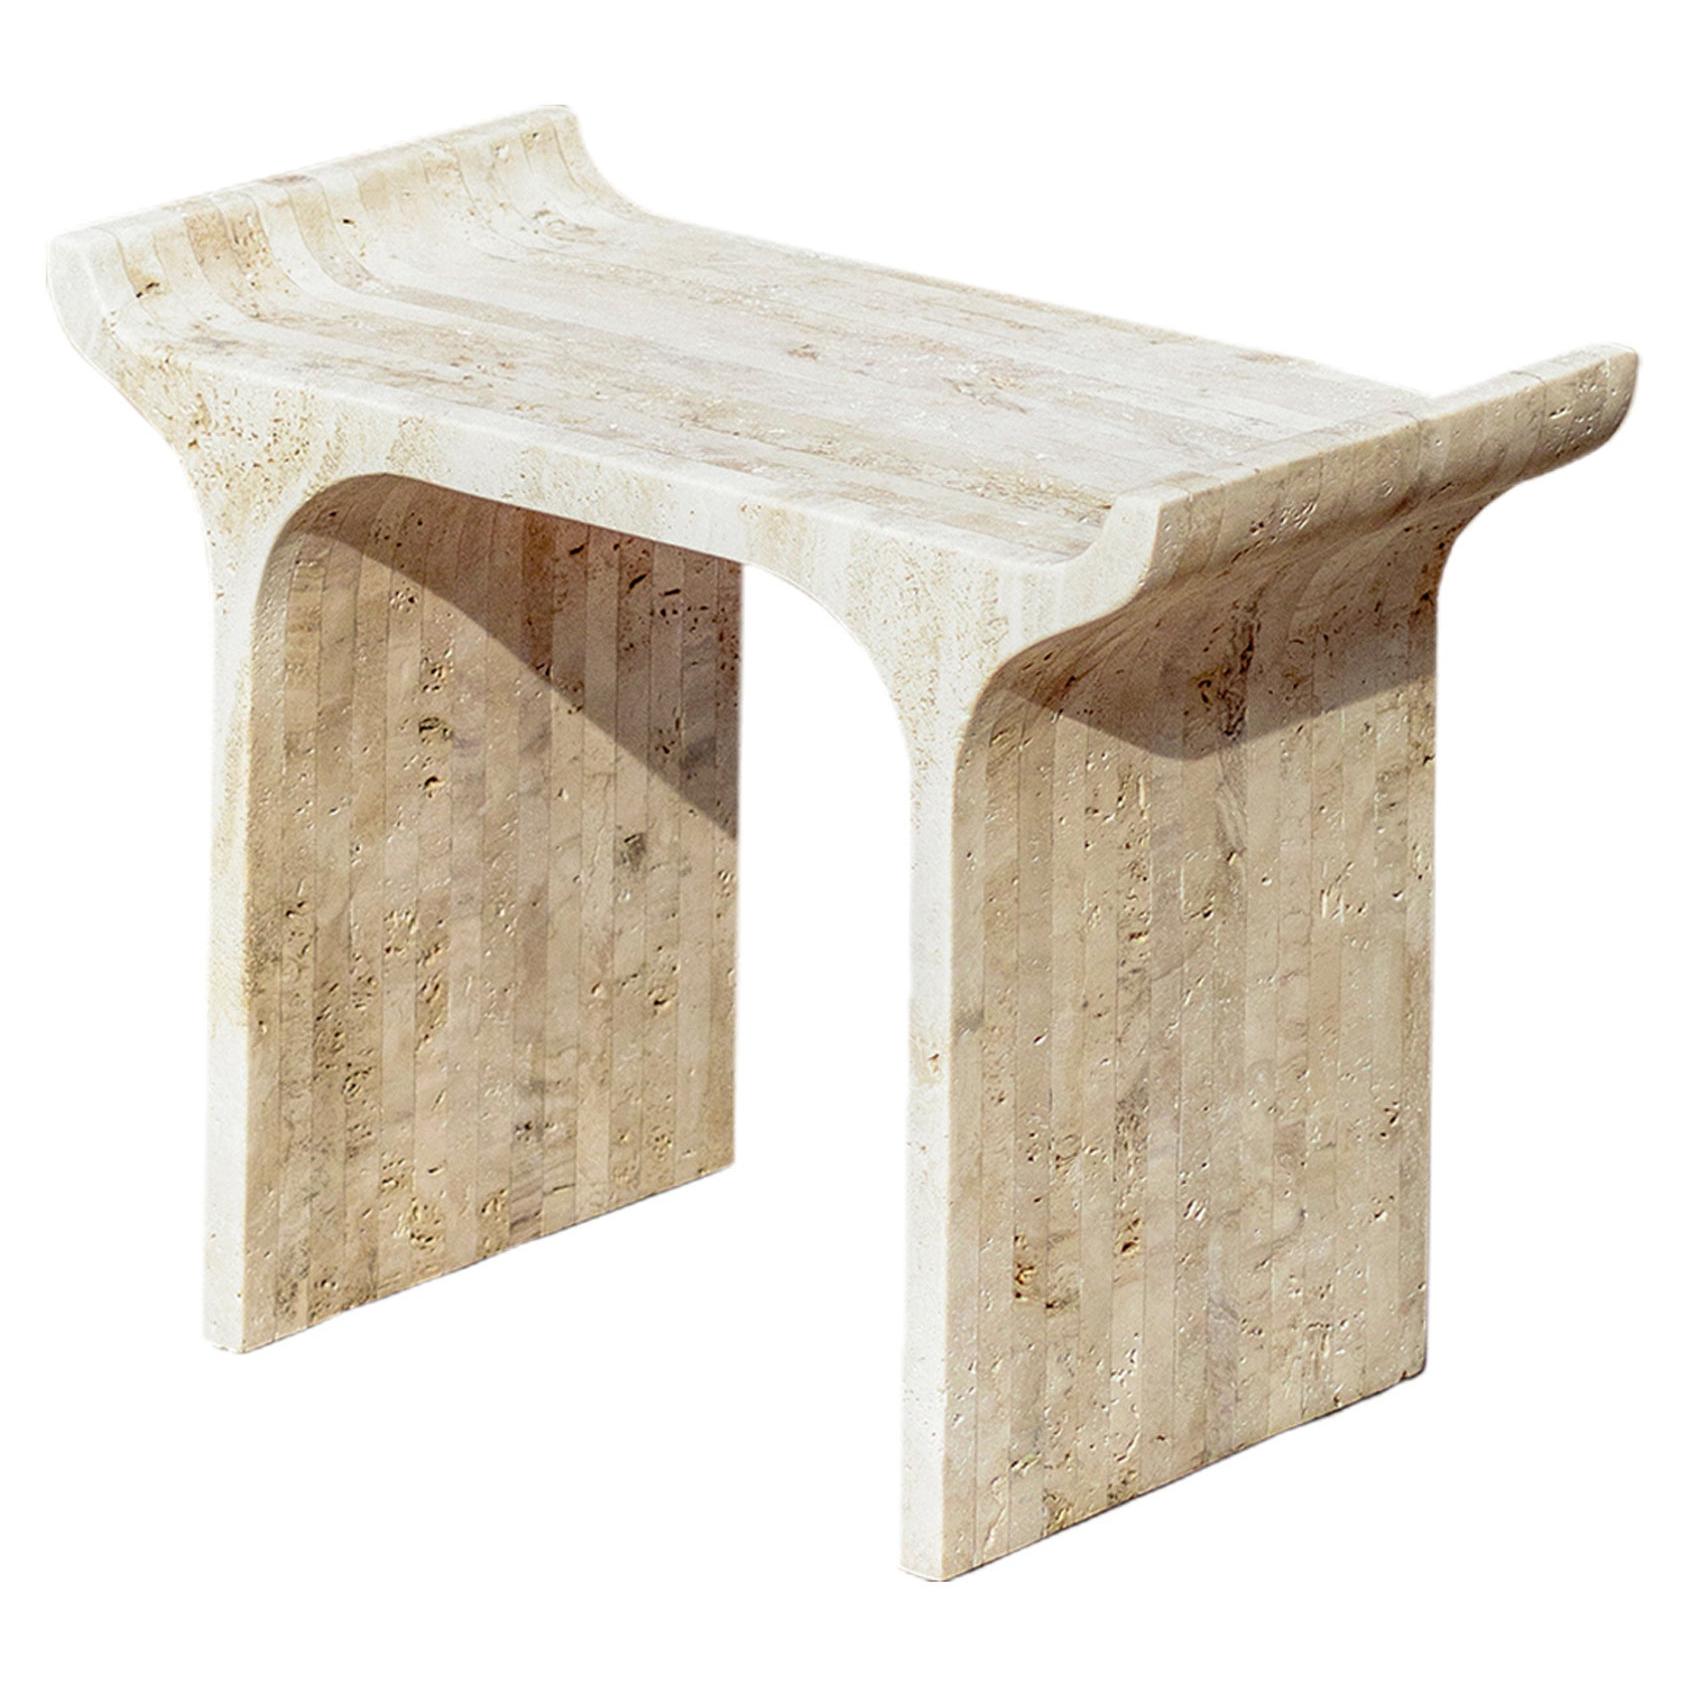 TORI Contemporary Low Stool in Travertine by Ries